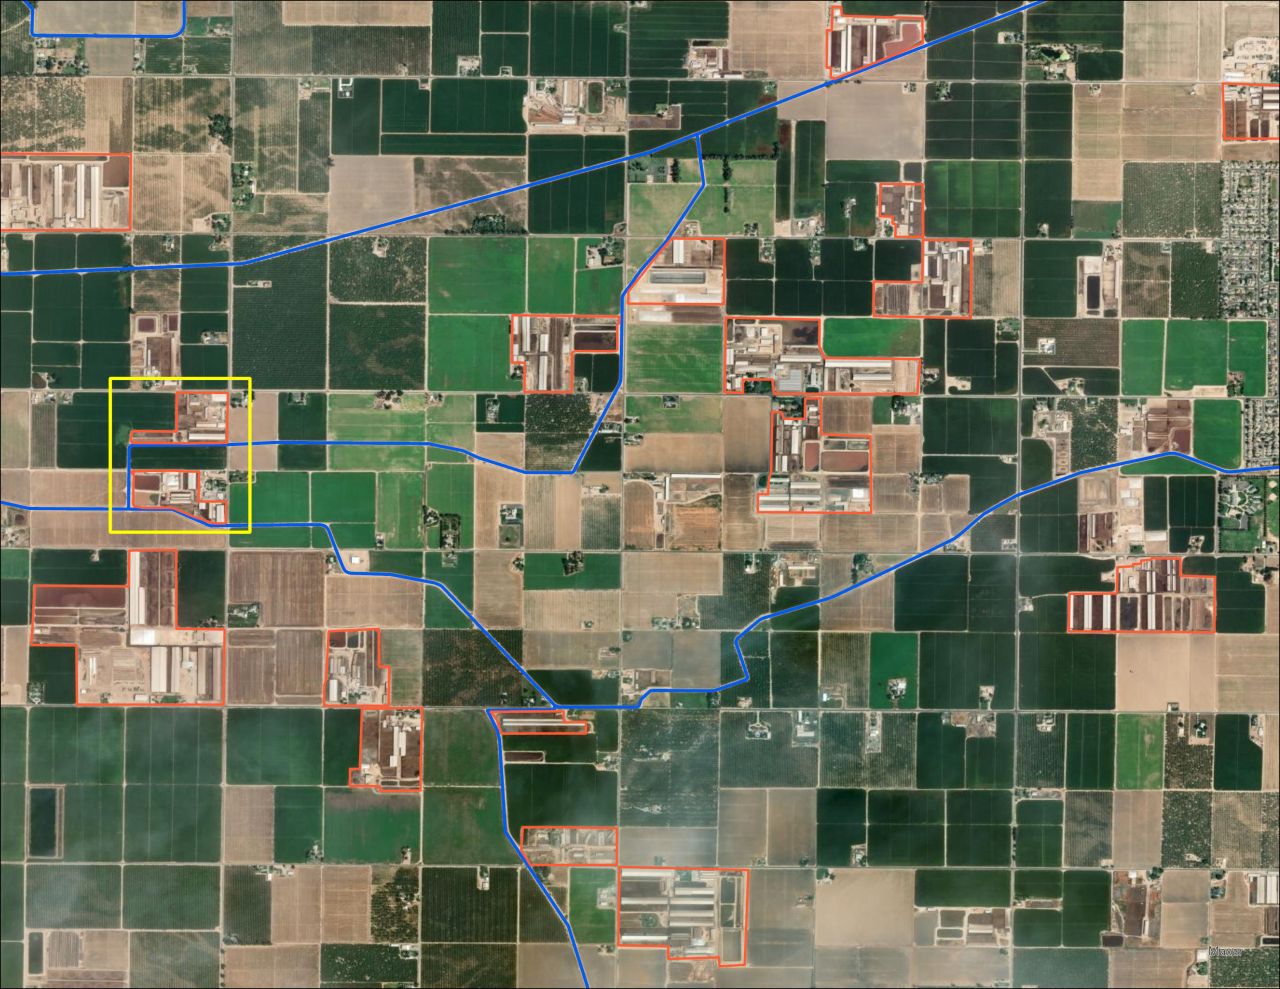 Two animal facilities next to irrigation canals in the Central Valley, with facilities outlined in orange and irrigation canals indicated by blue.